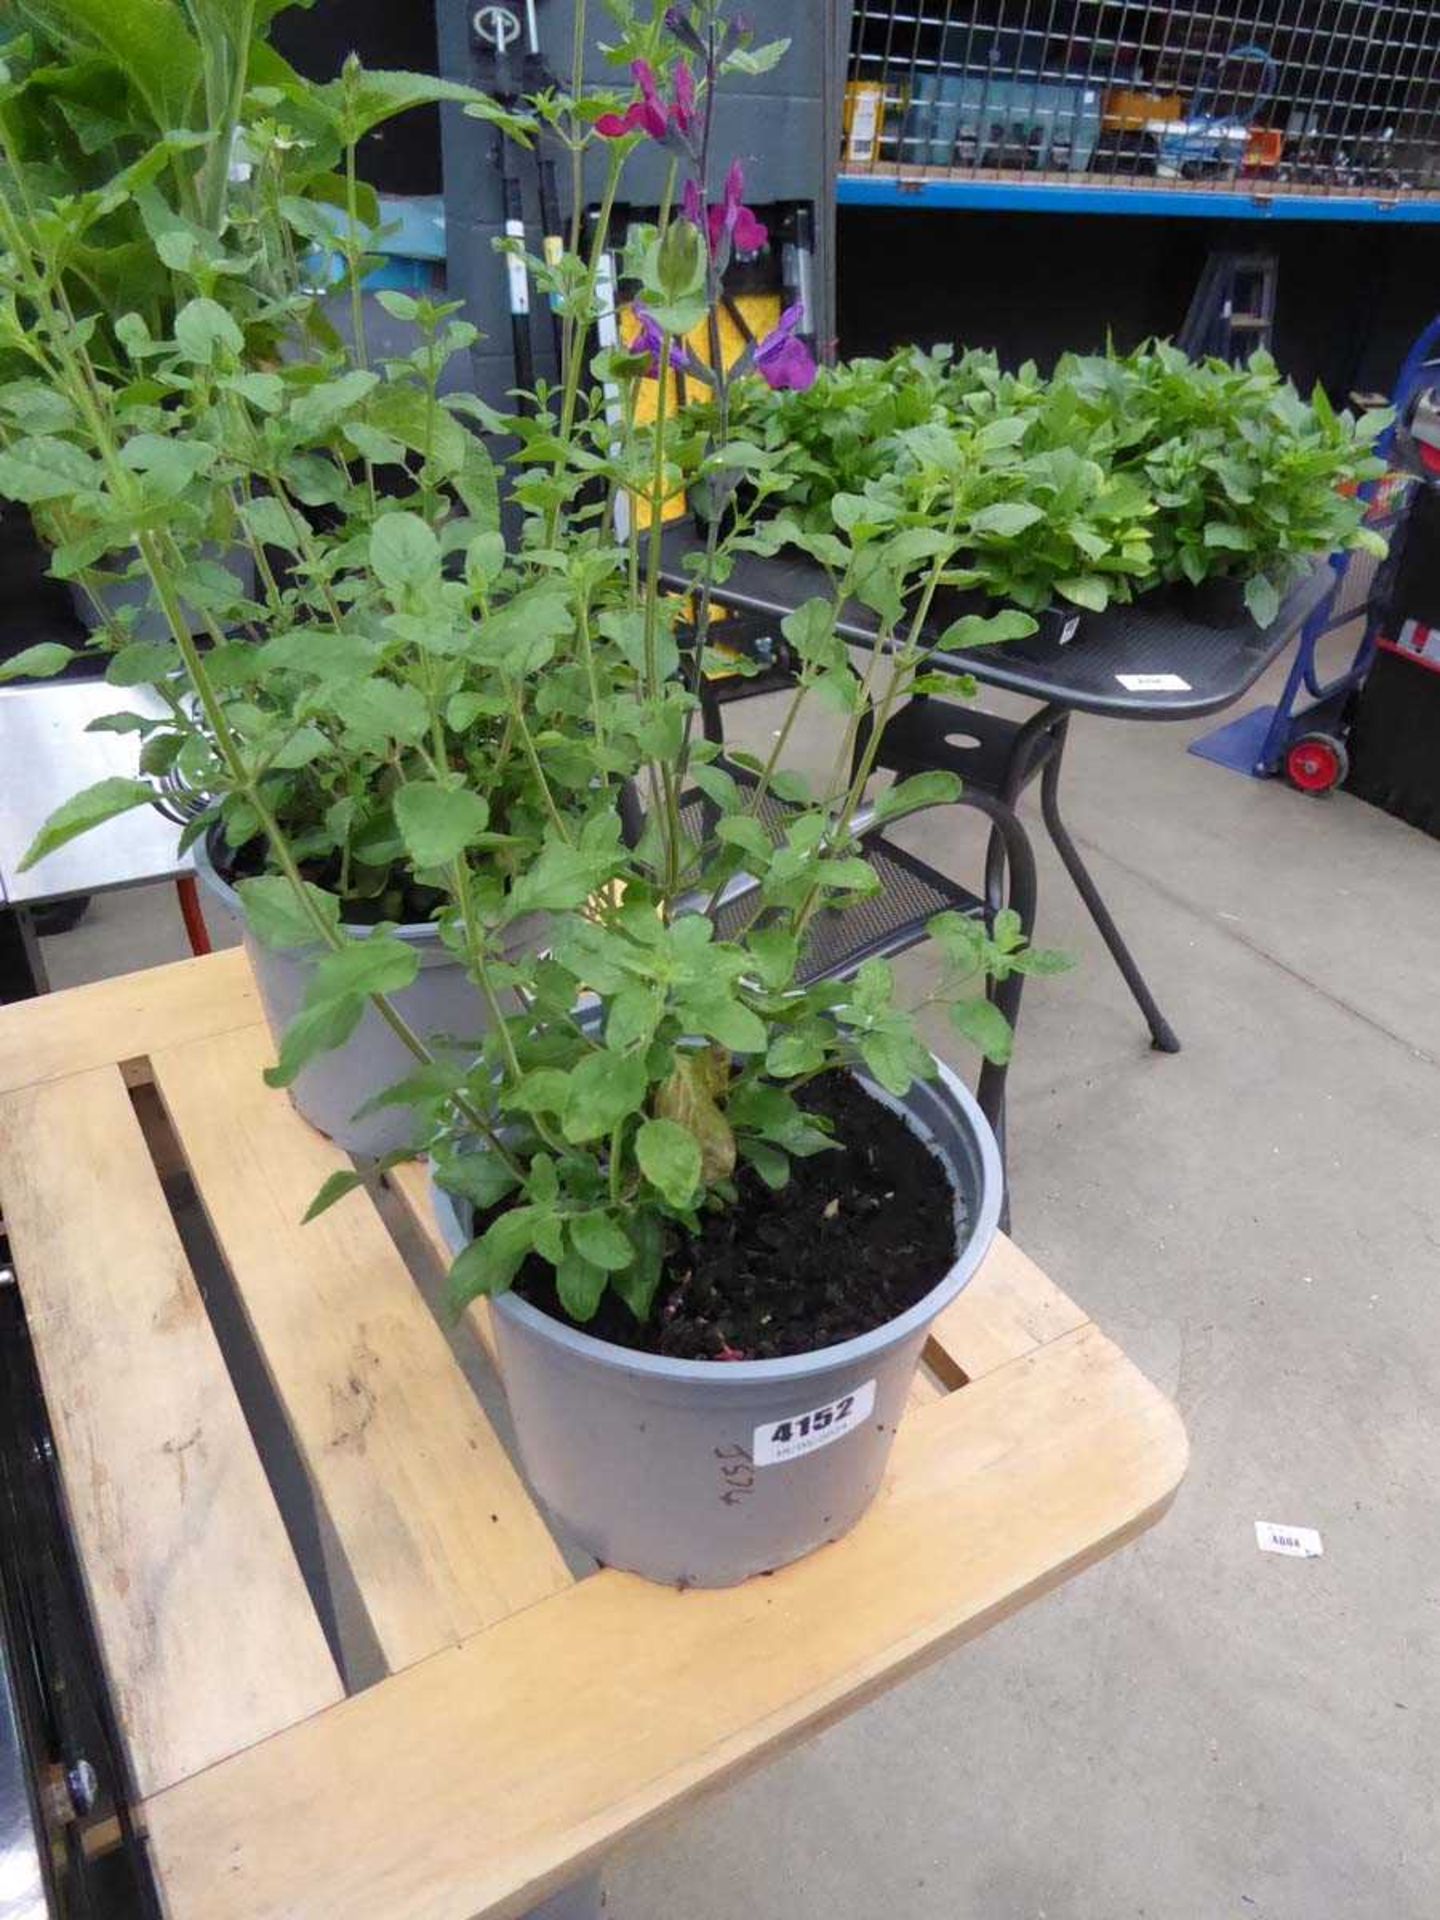 Potted Salvia plant